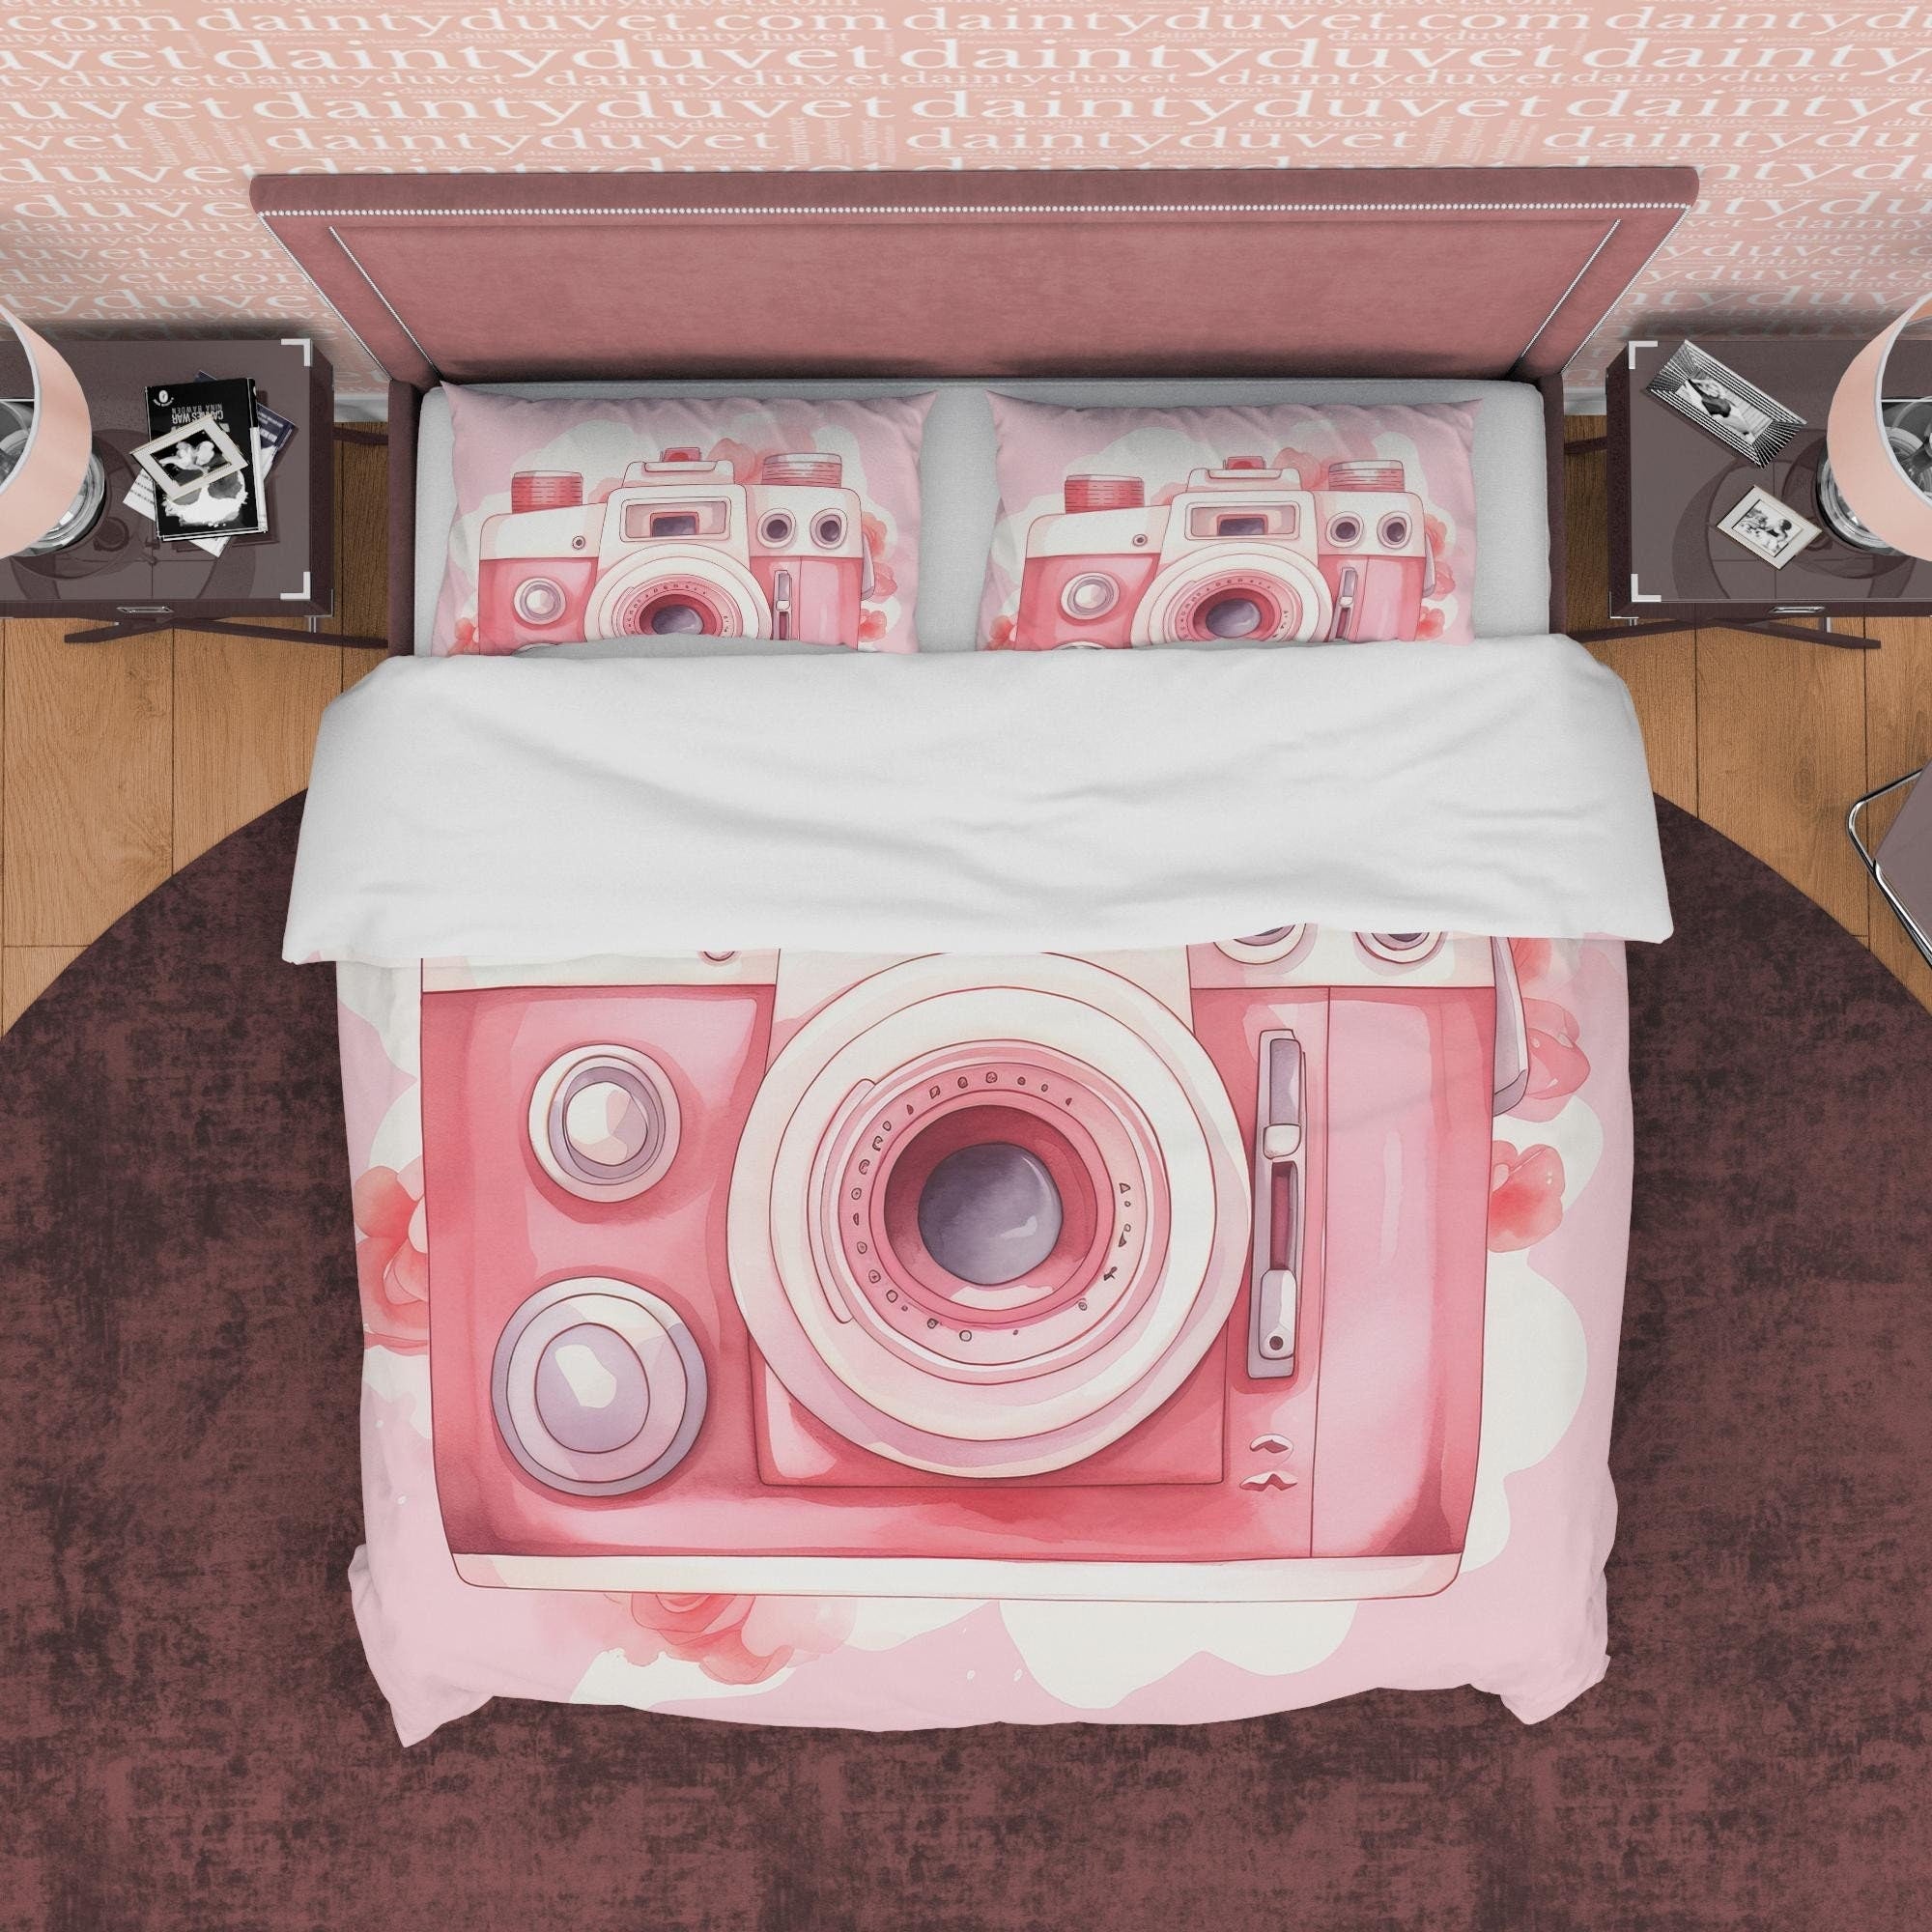 Lovely Retro Camera Duvet Cover Set Baby Pink Bedding, Girly Bedroom Set, Cute Quilt Cover, Photophille Bedspread, Photographer Gift